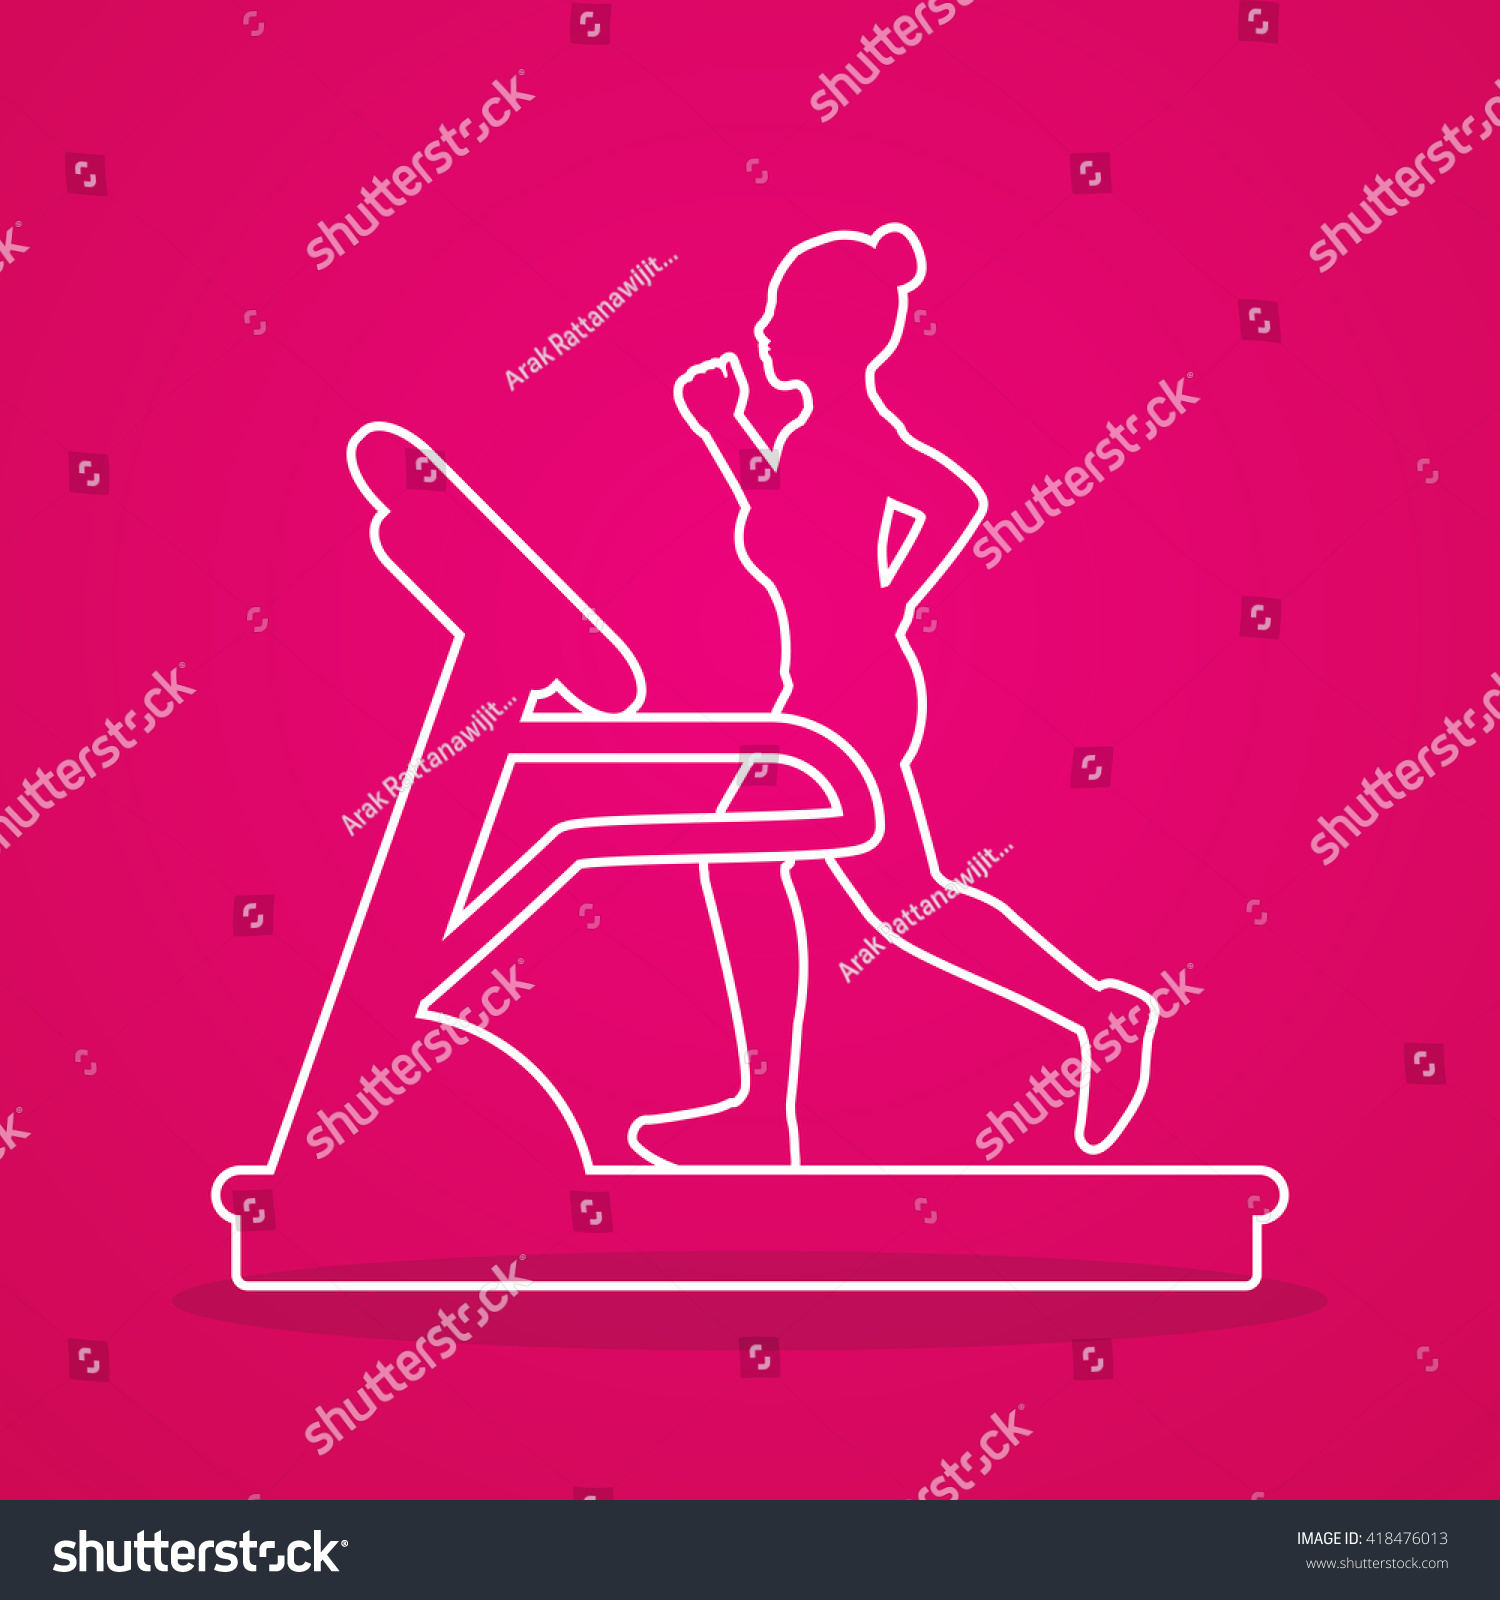 Woman Running On A Treadmill Outline Graphic Royalty Free Stock Vector 418476013 0614